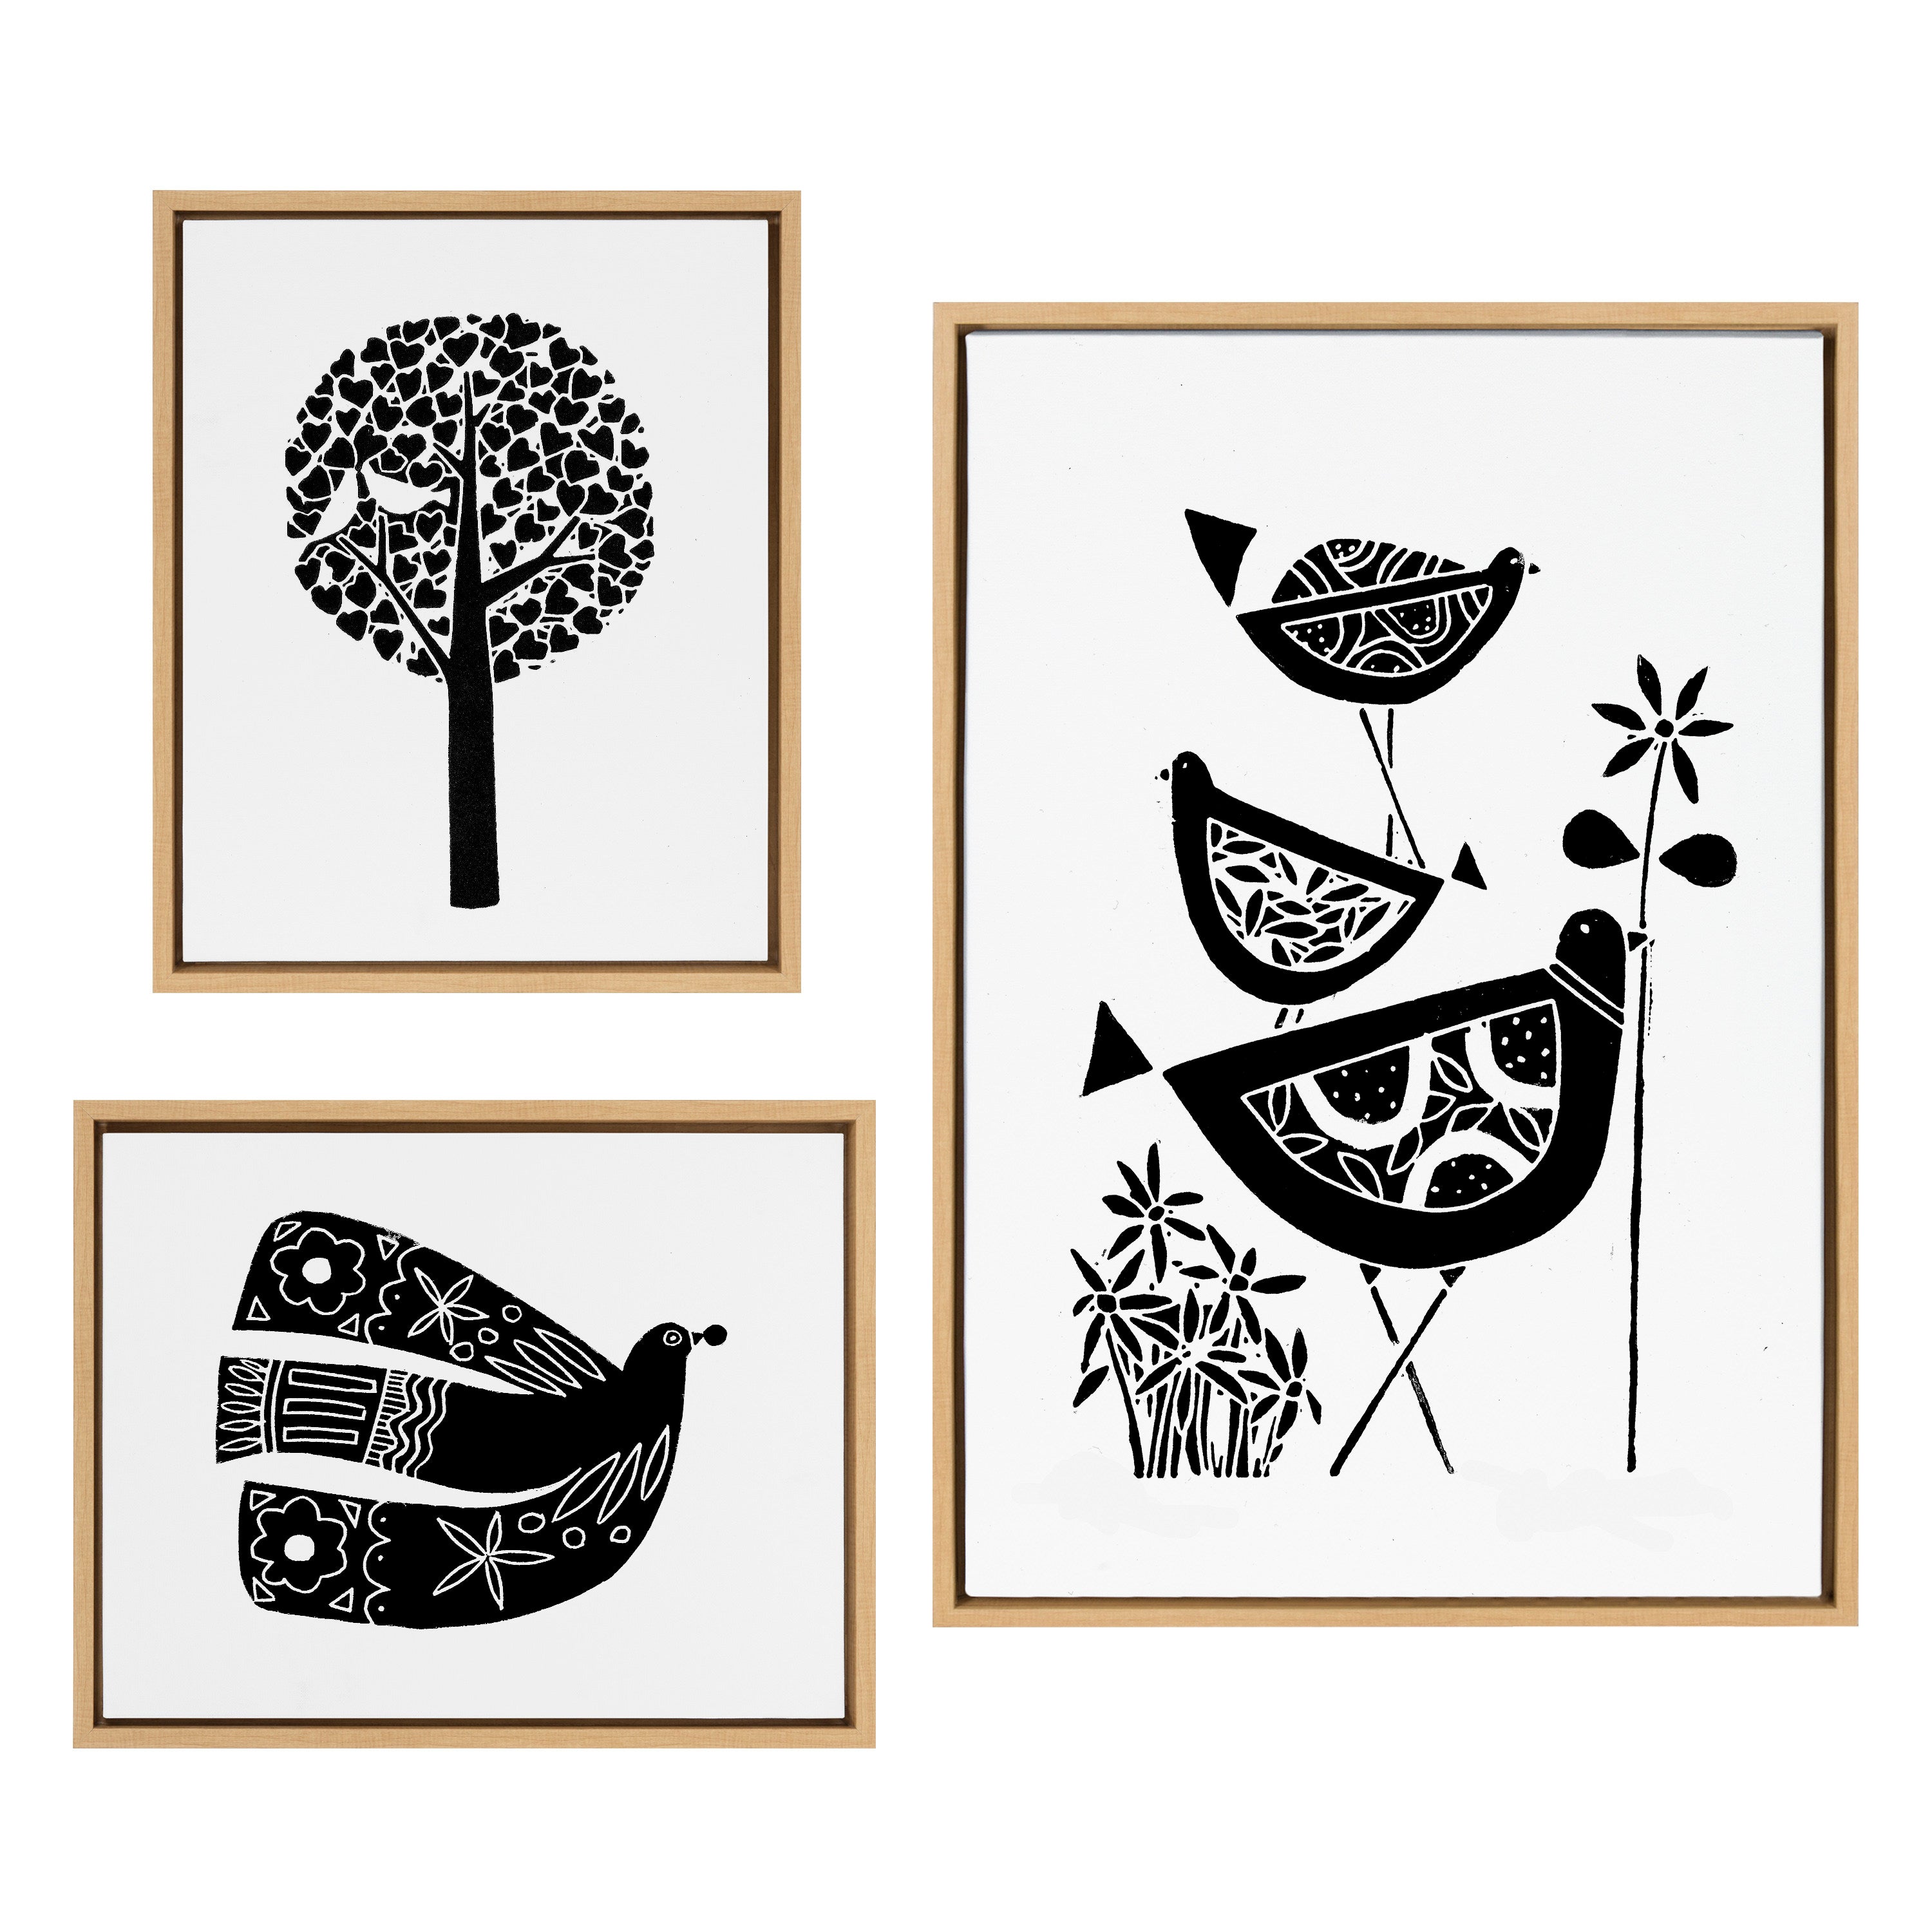 Kate and Laurel Sylvie Trio Linocut, Love Tree Linocut and Over the Cloud  Linocut Framed Canvas Wall Art Set by Giuliana Lazzerini, 3 Piece Set  Natural, Black and White Natural Art for